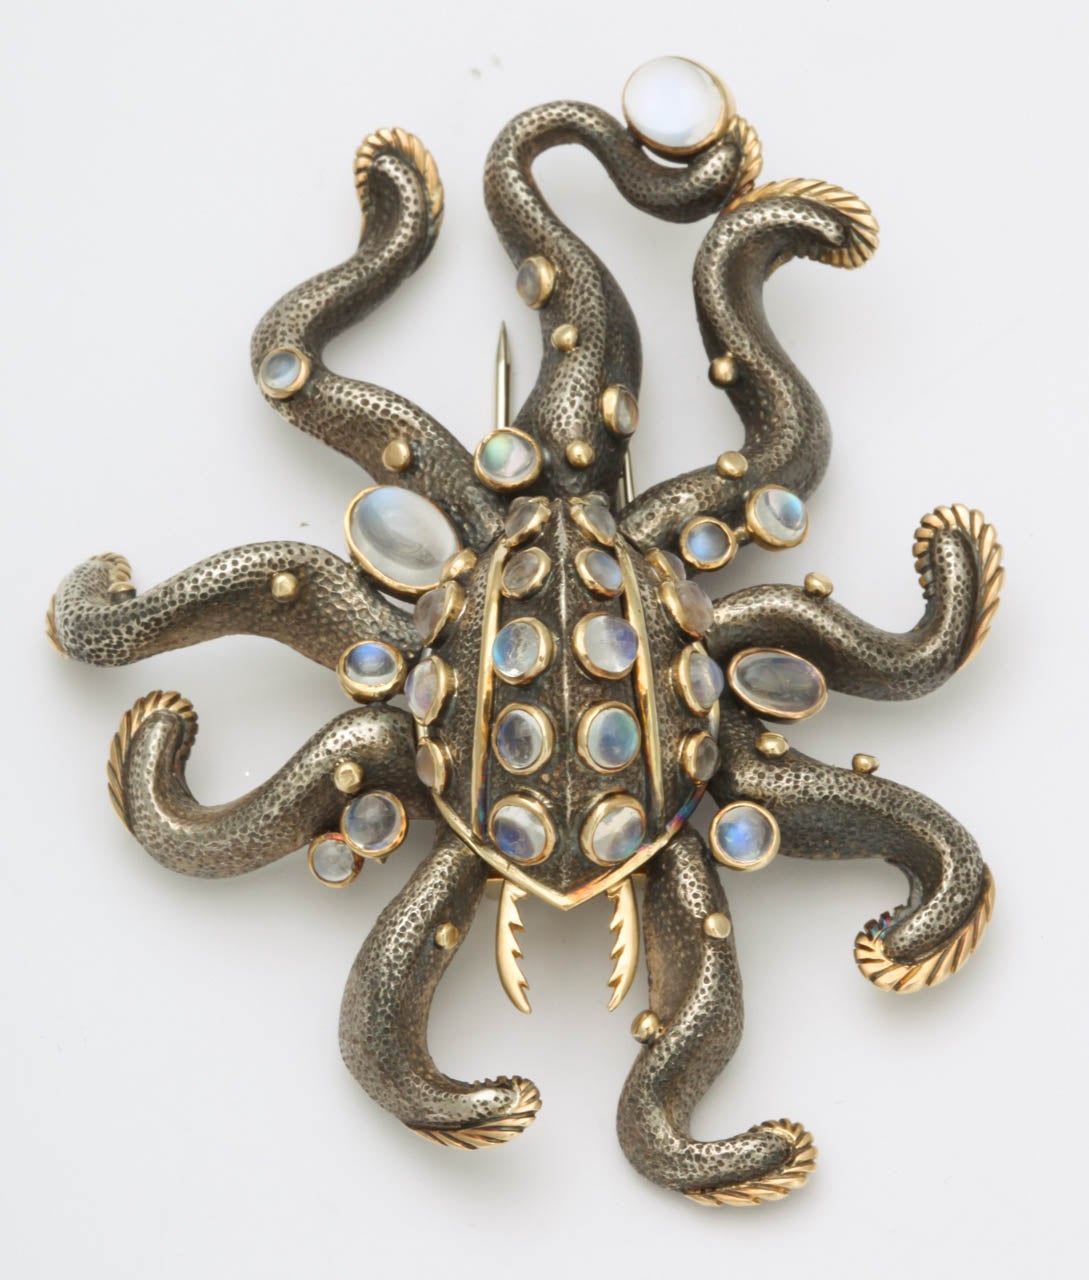 Overpowering Octopus Pin in patinated silver & 18kt Yellow Gold set with  glistening Moonstones.  Signed.   MFC 750 & 925.  Body in silver & details edged in 18Kt  yellow Gold and fastened by double clip for security.